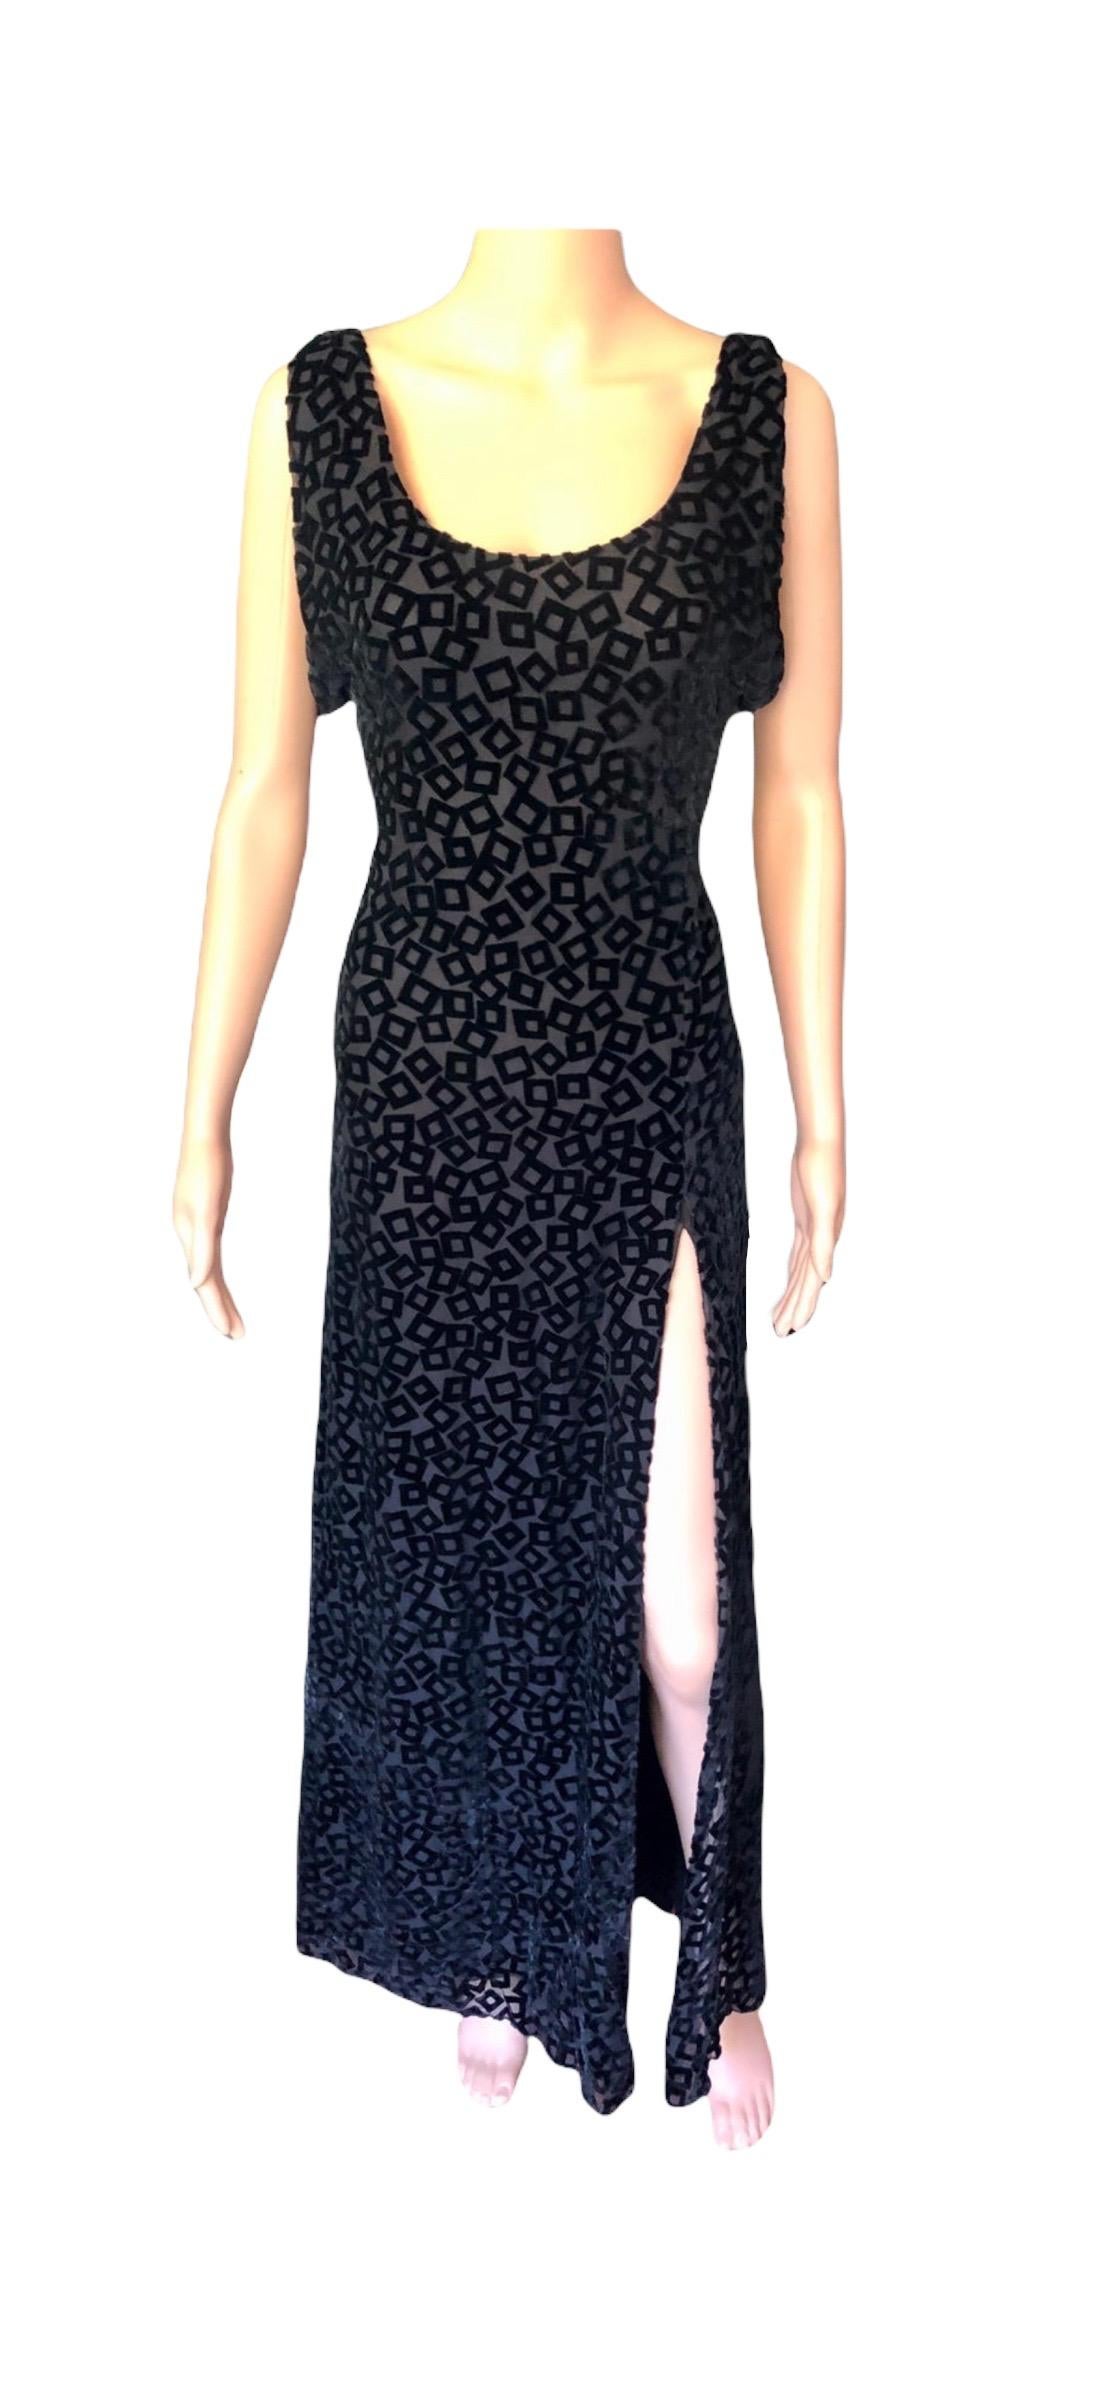 Gianni Versace S/S 1999 Vintage Black Evening Dress Gown For Sale 8